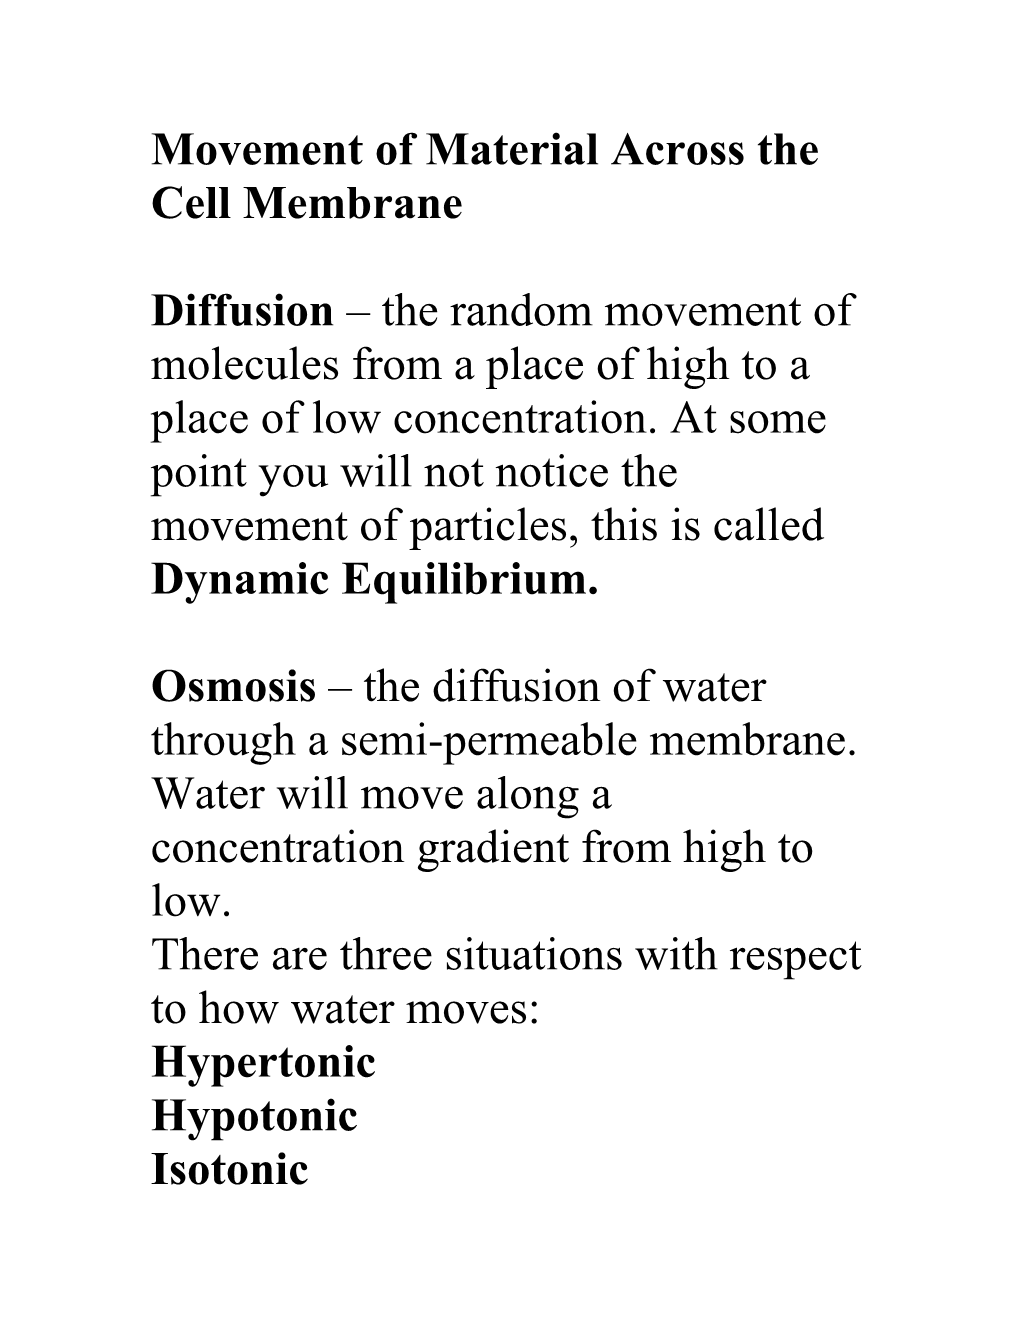 Movement of Material Across the Cell Membrane